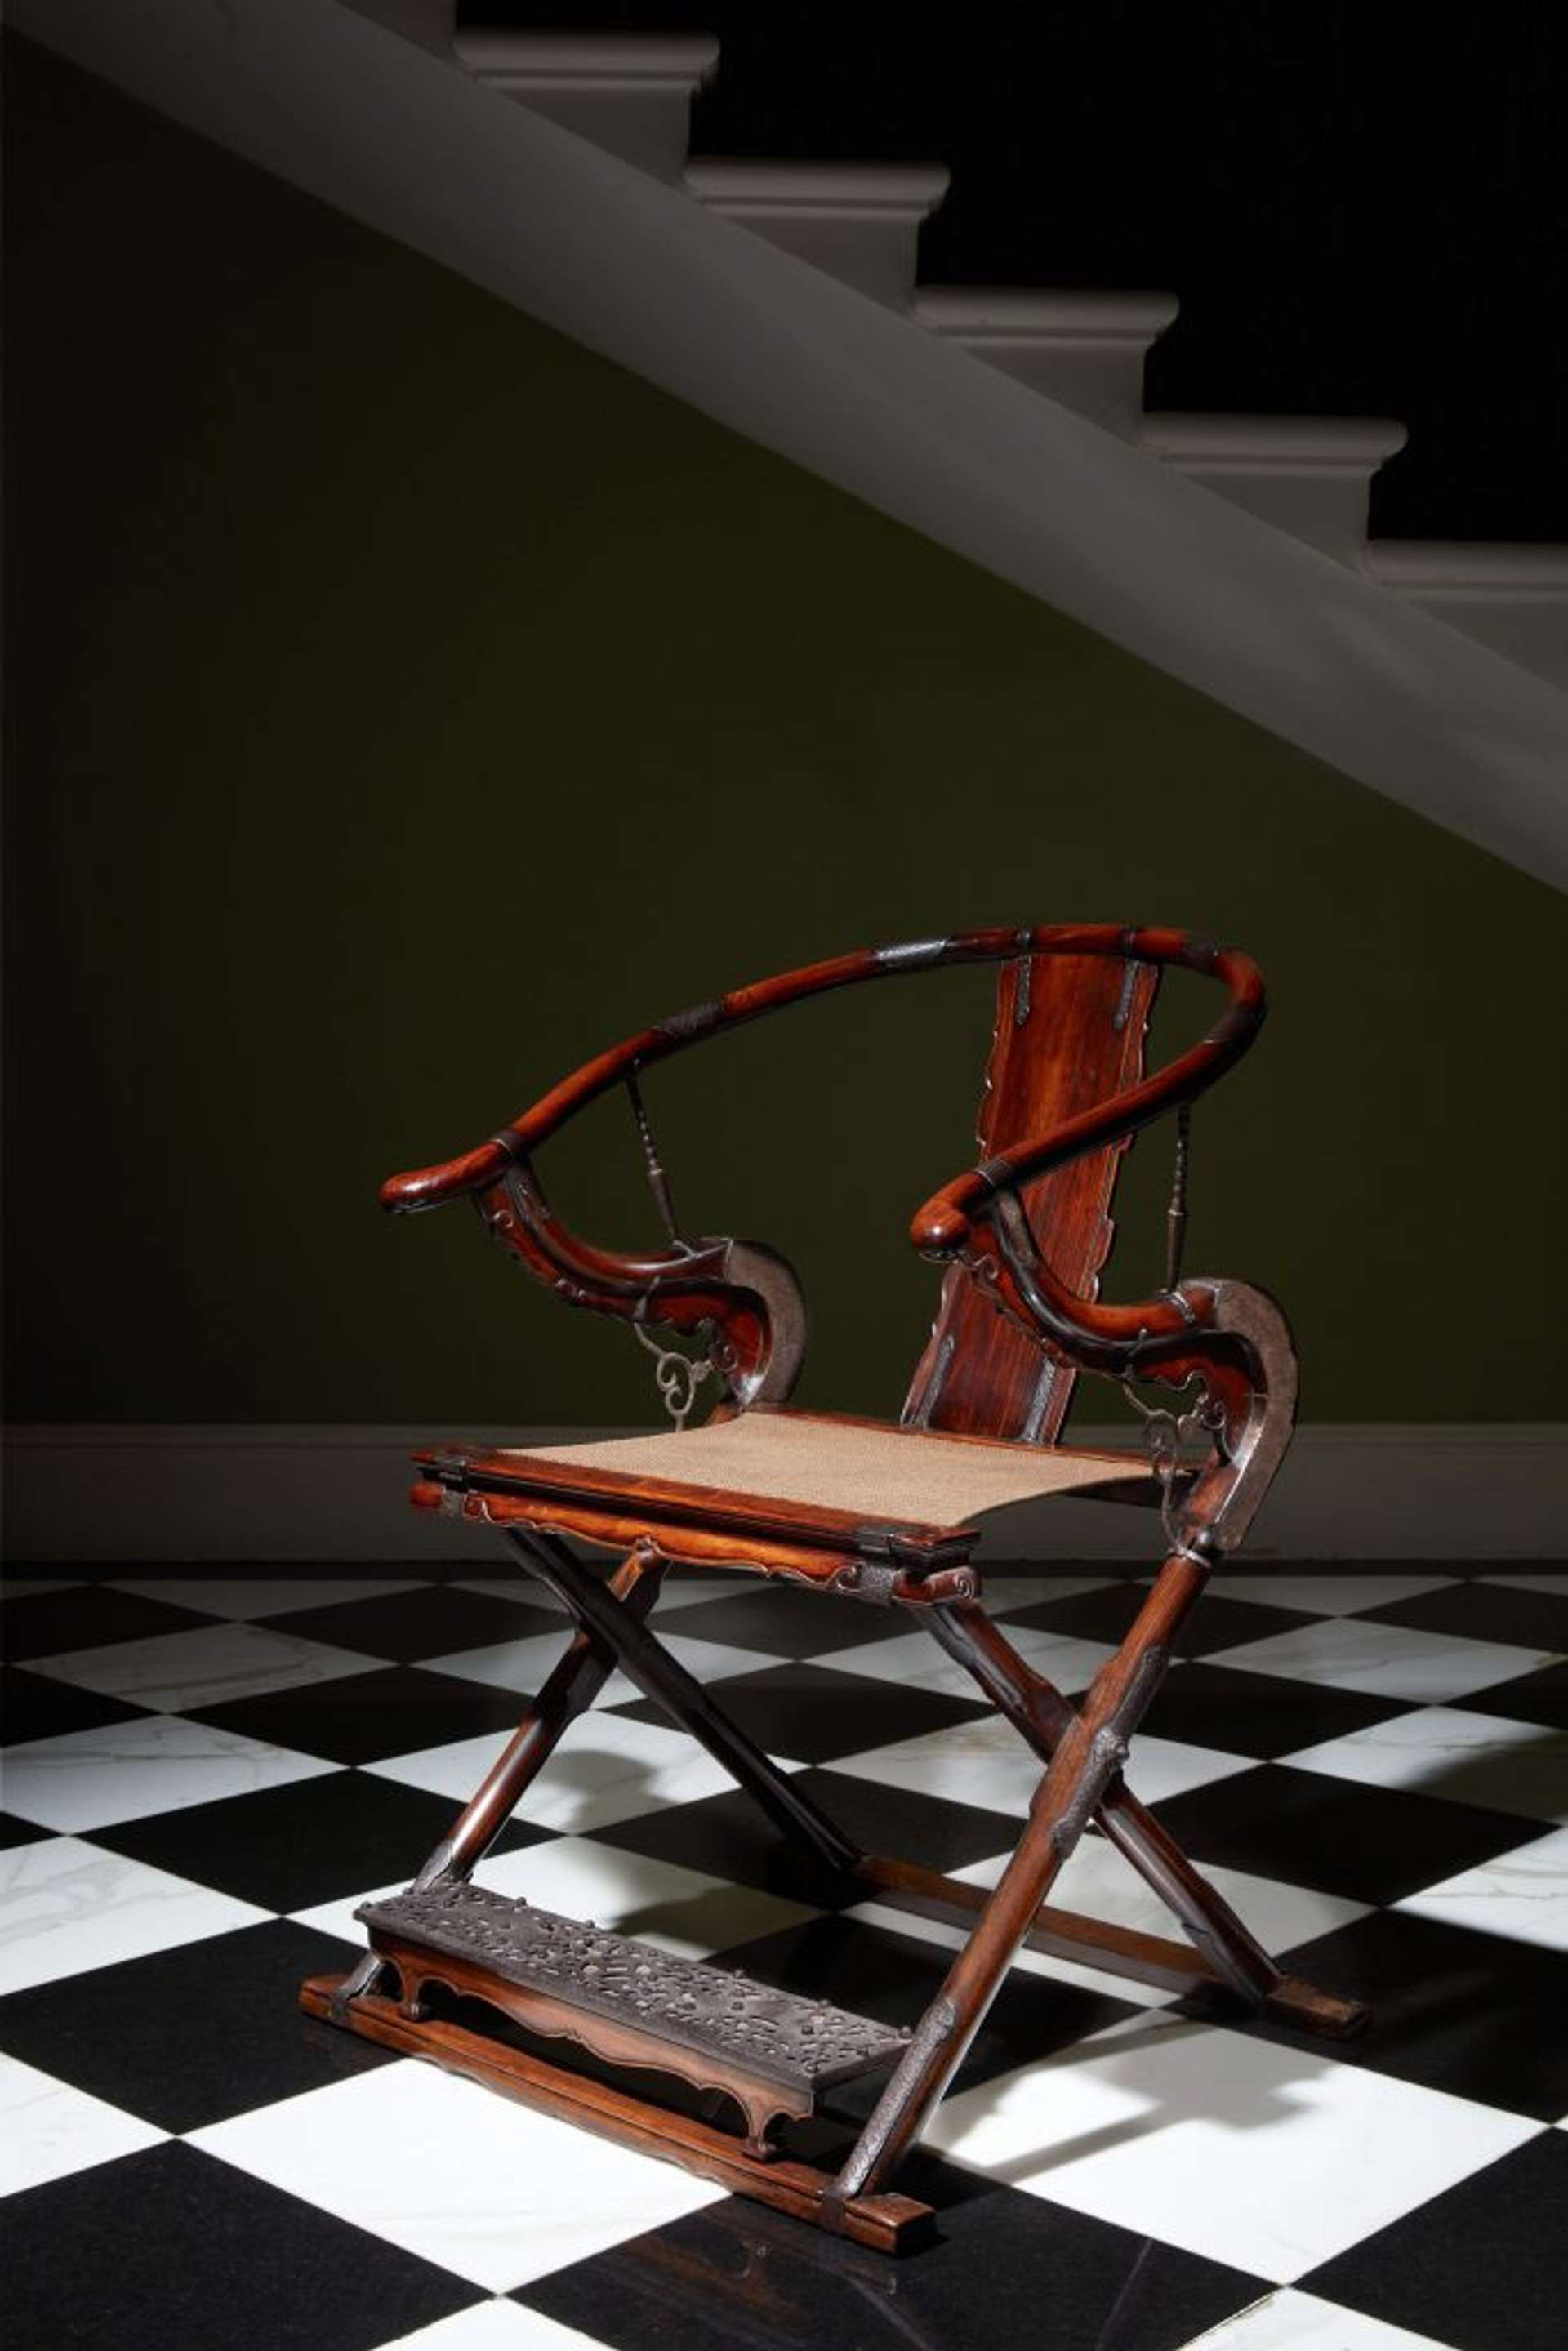 A decorative wooden chair with curved features and decorative foot rest attached on a black and white chequered floor